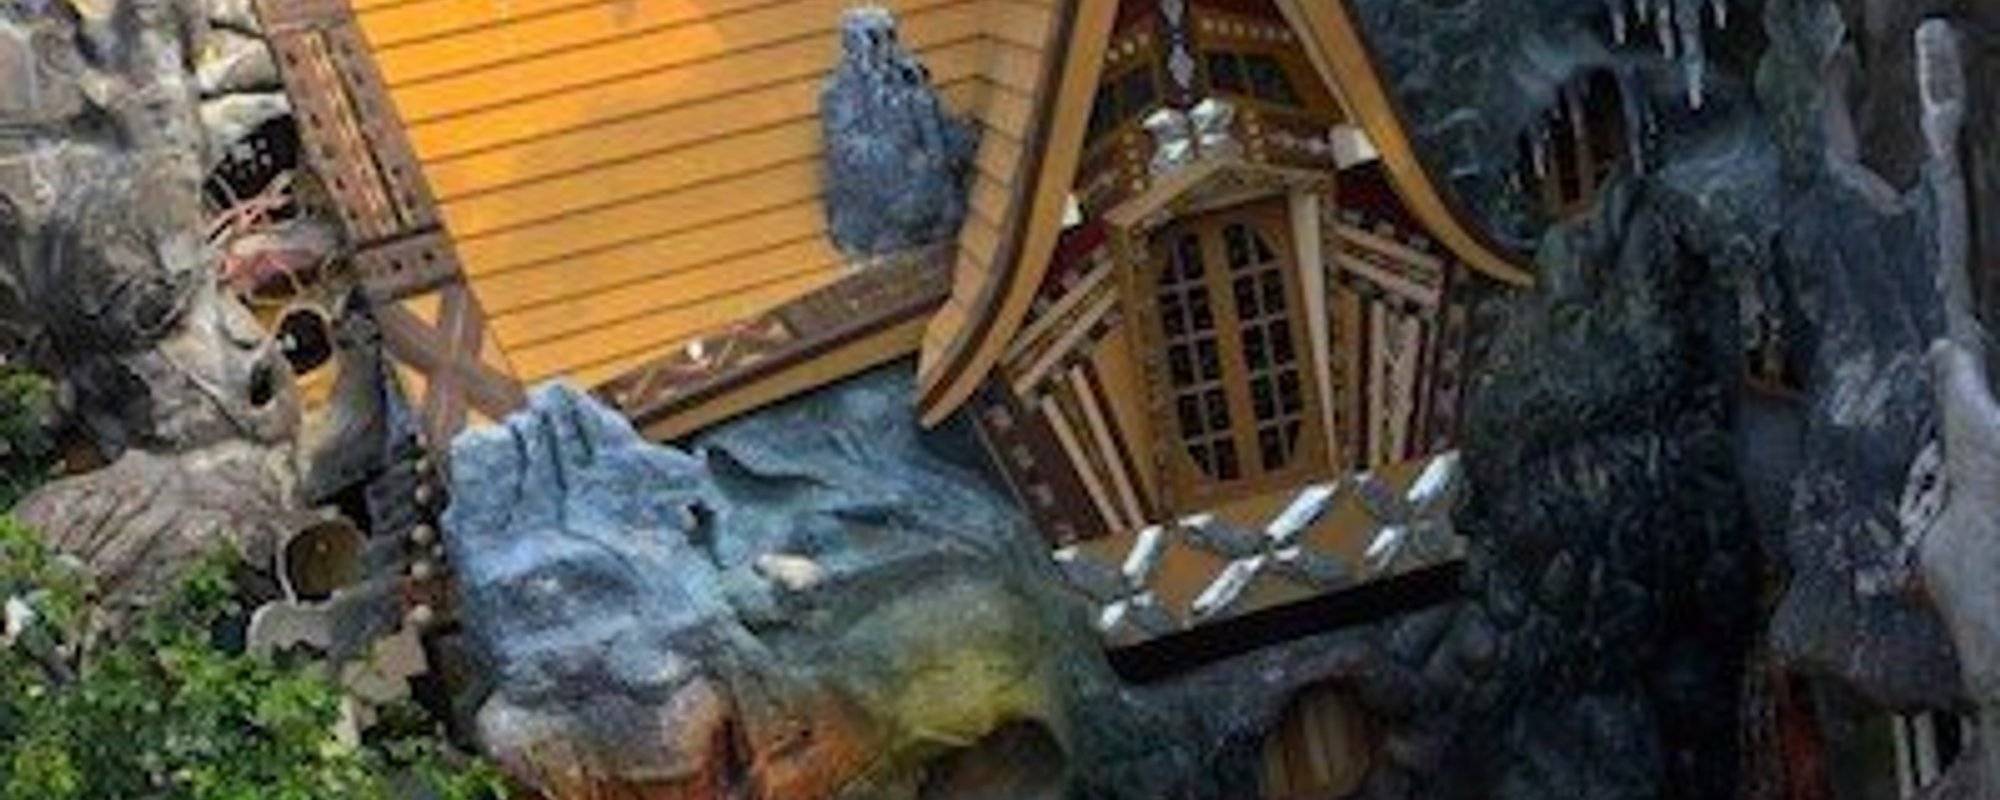 7 Reasons Crazy House is the Most Unique Attraction in Dalat Vietnam